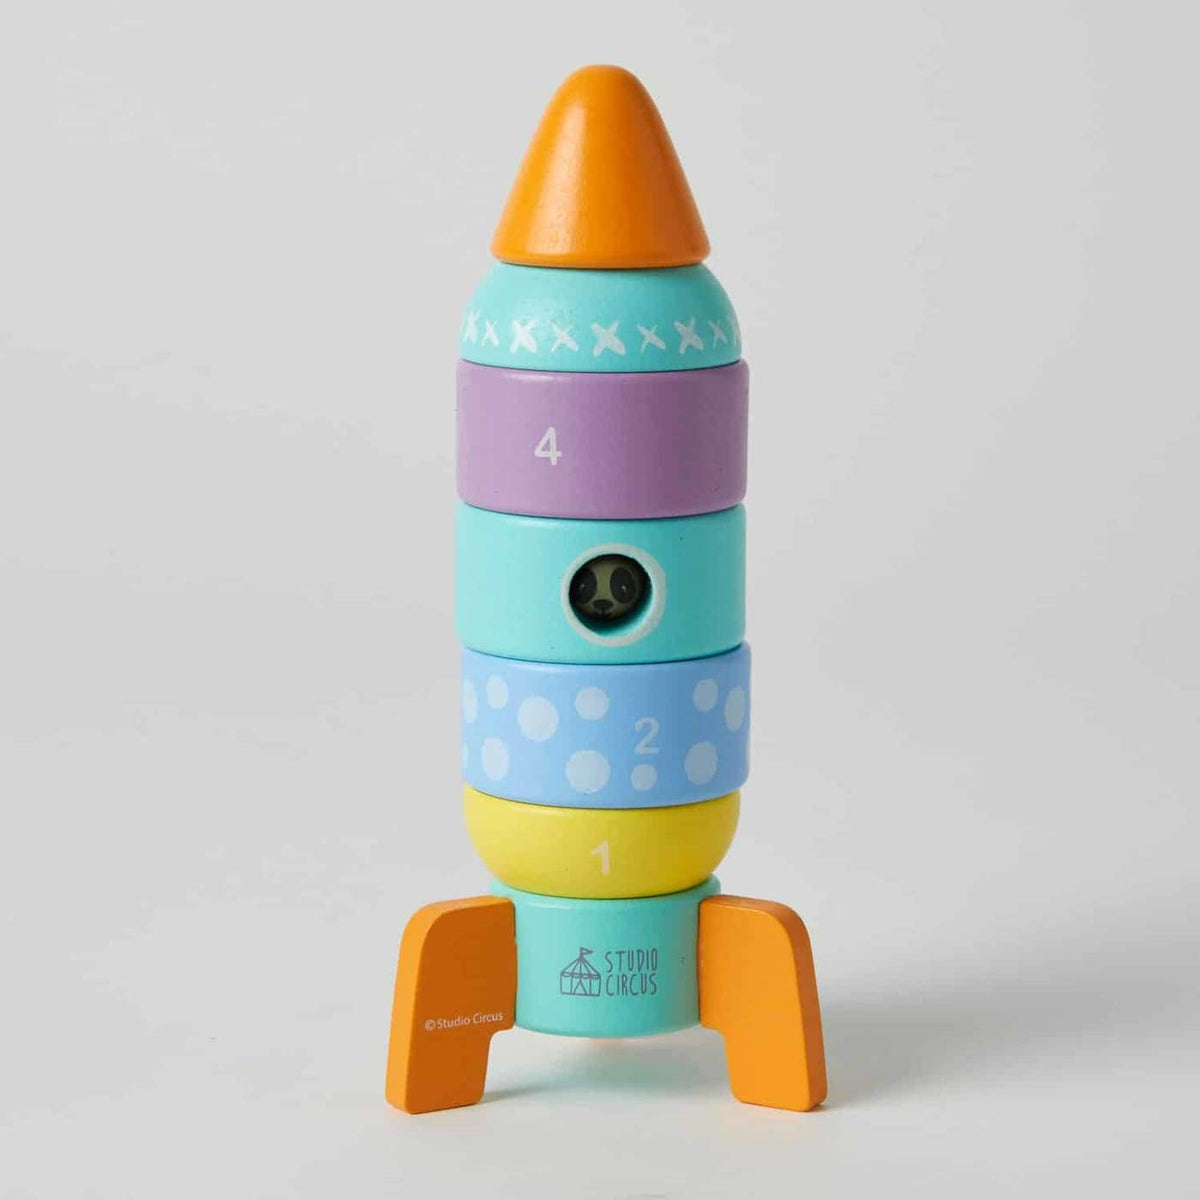 Sudio Circus Rocket Tower - TOYS &amp; PLAY - HAND HELD/EDUCATIONAL